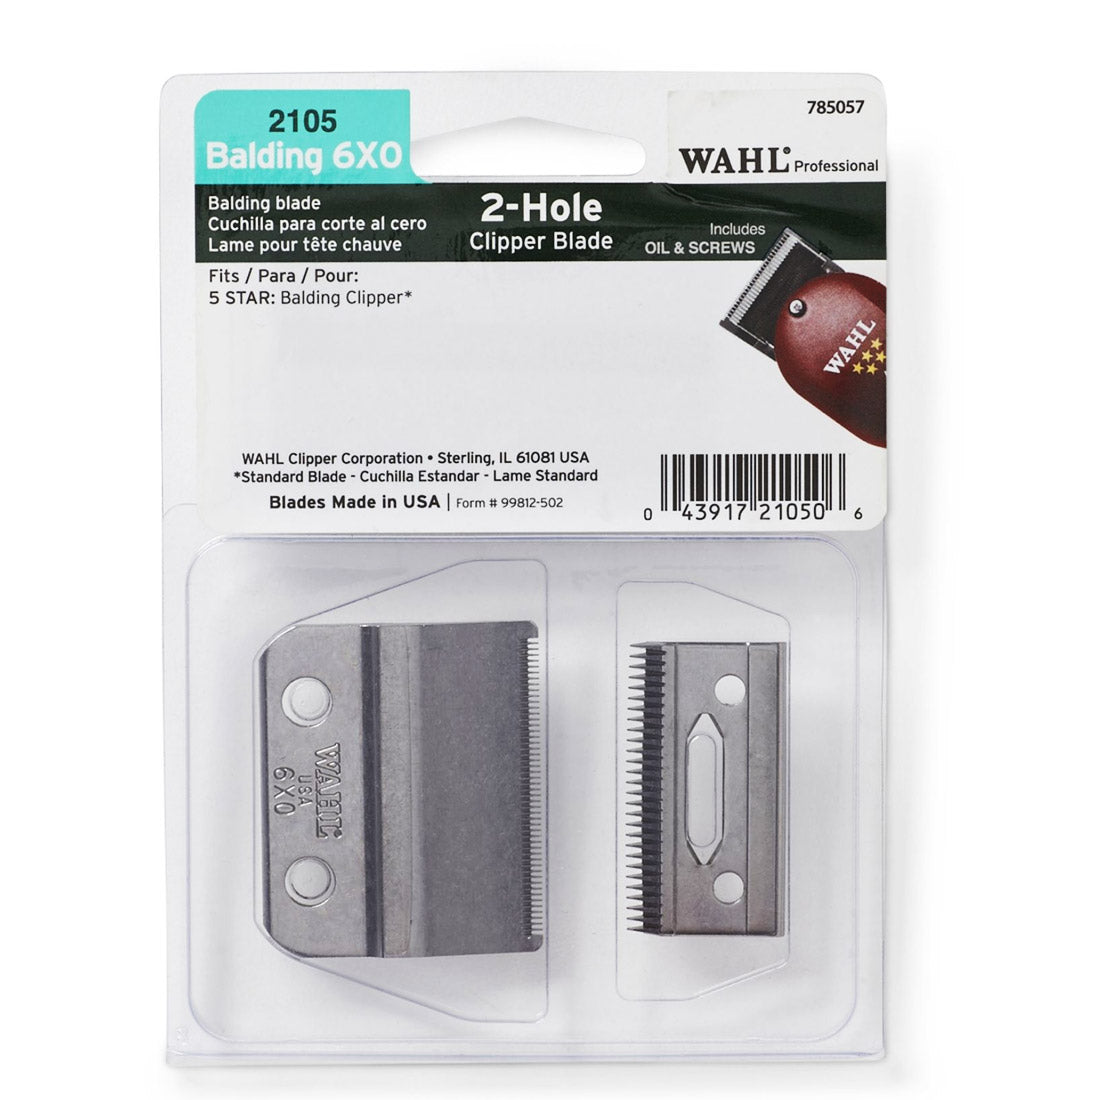 Wahl 5-Star Clipper Replacement Blade 2105 Balding 6X0